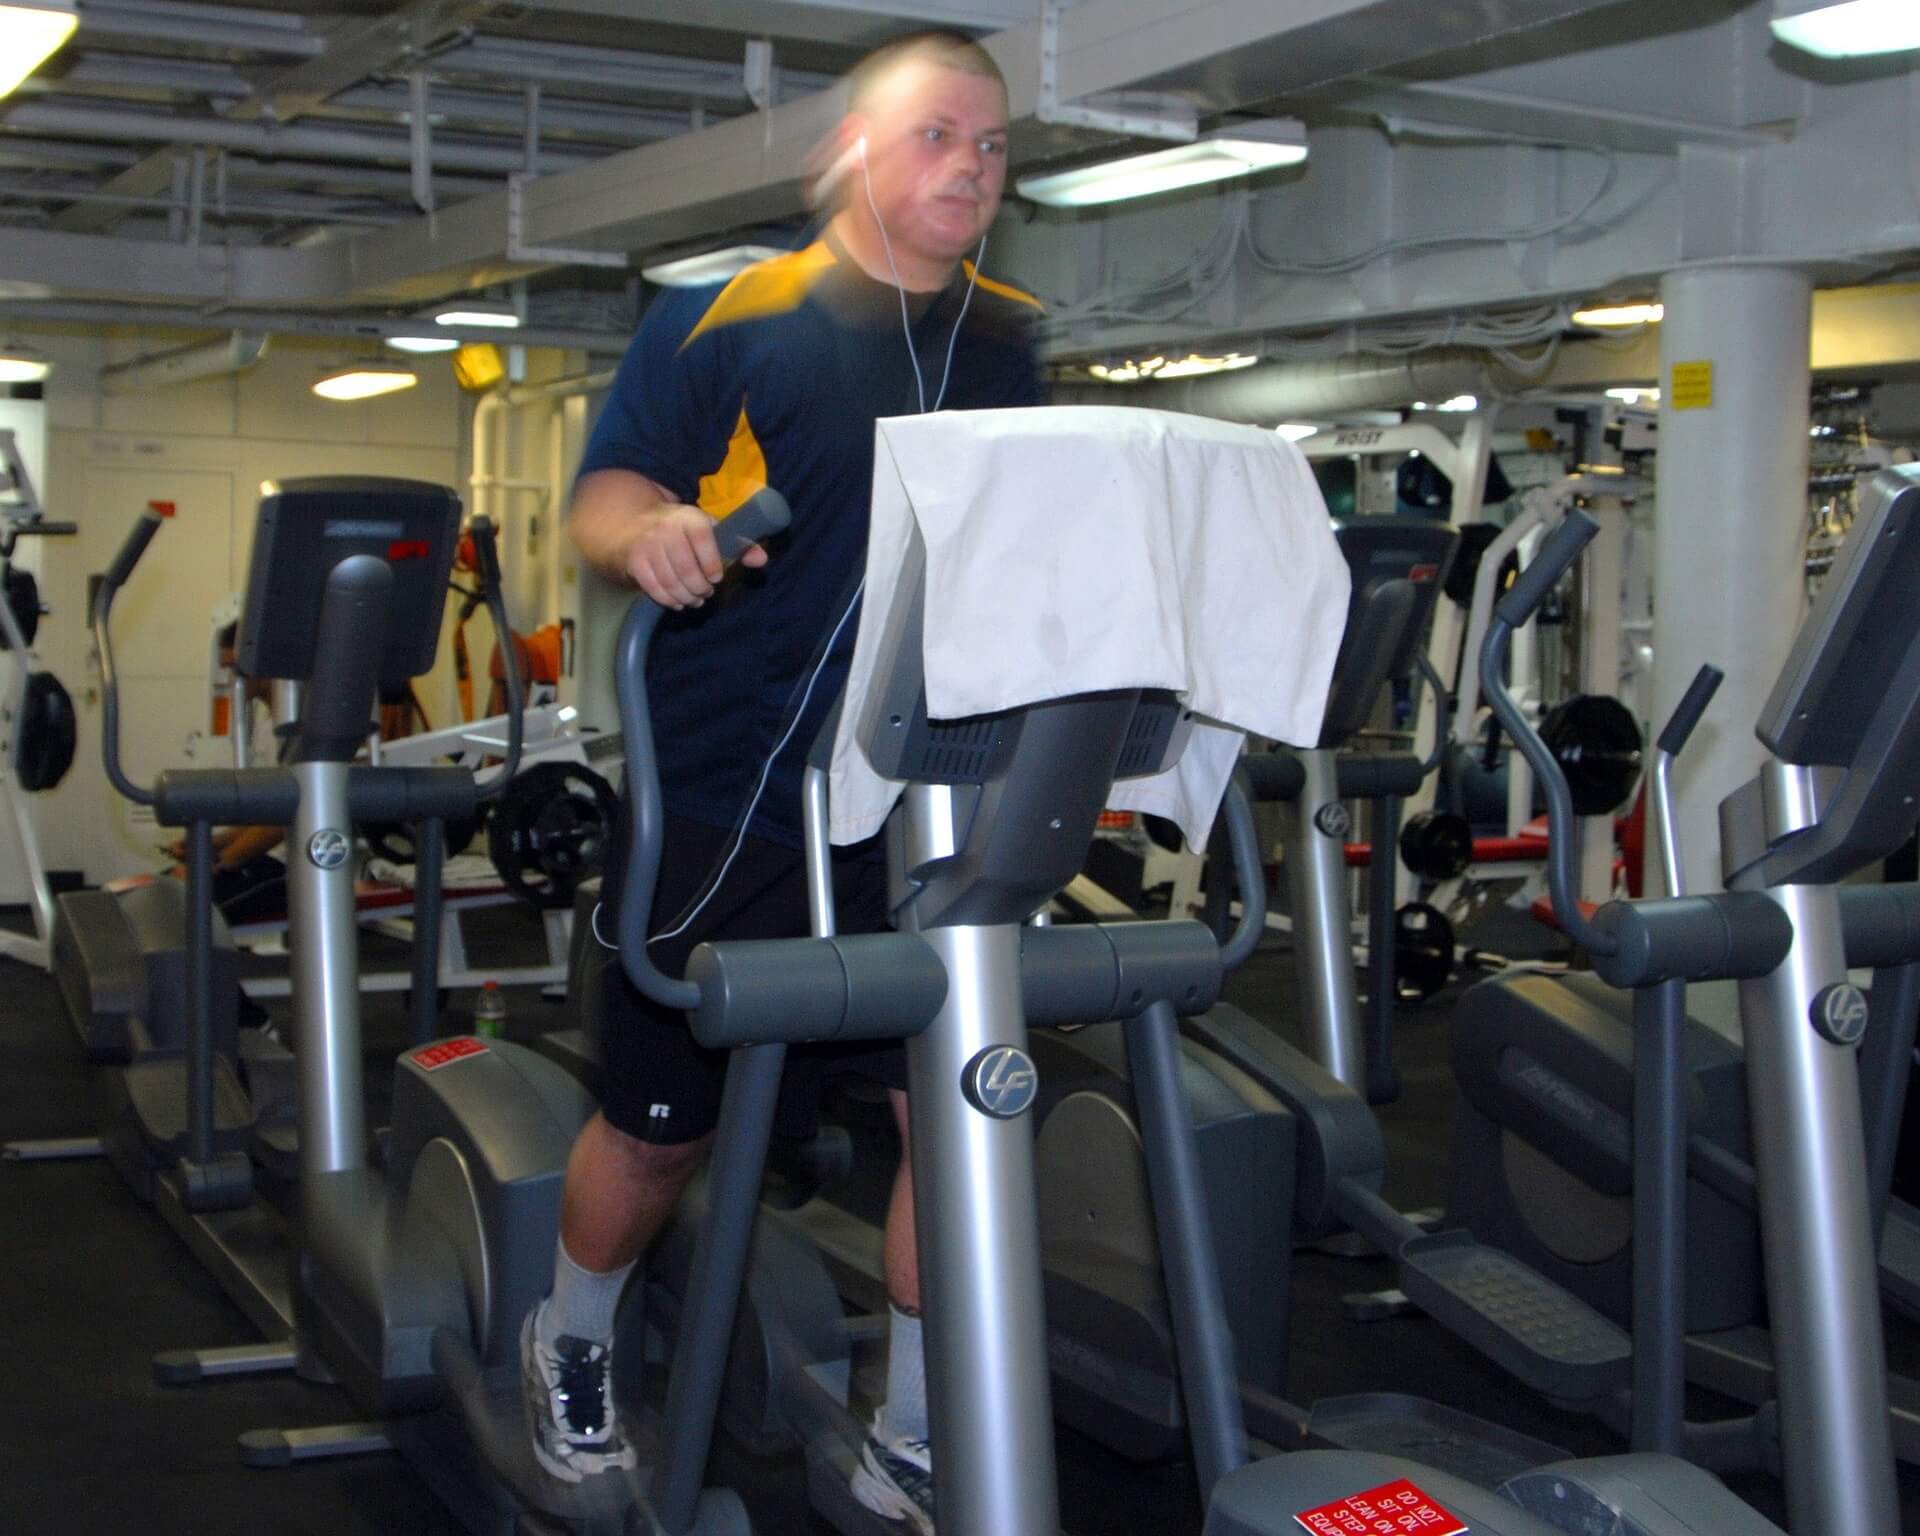 Let’s Debunk Some Common Misconceptions & Myths about Elliptical Trainers